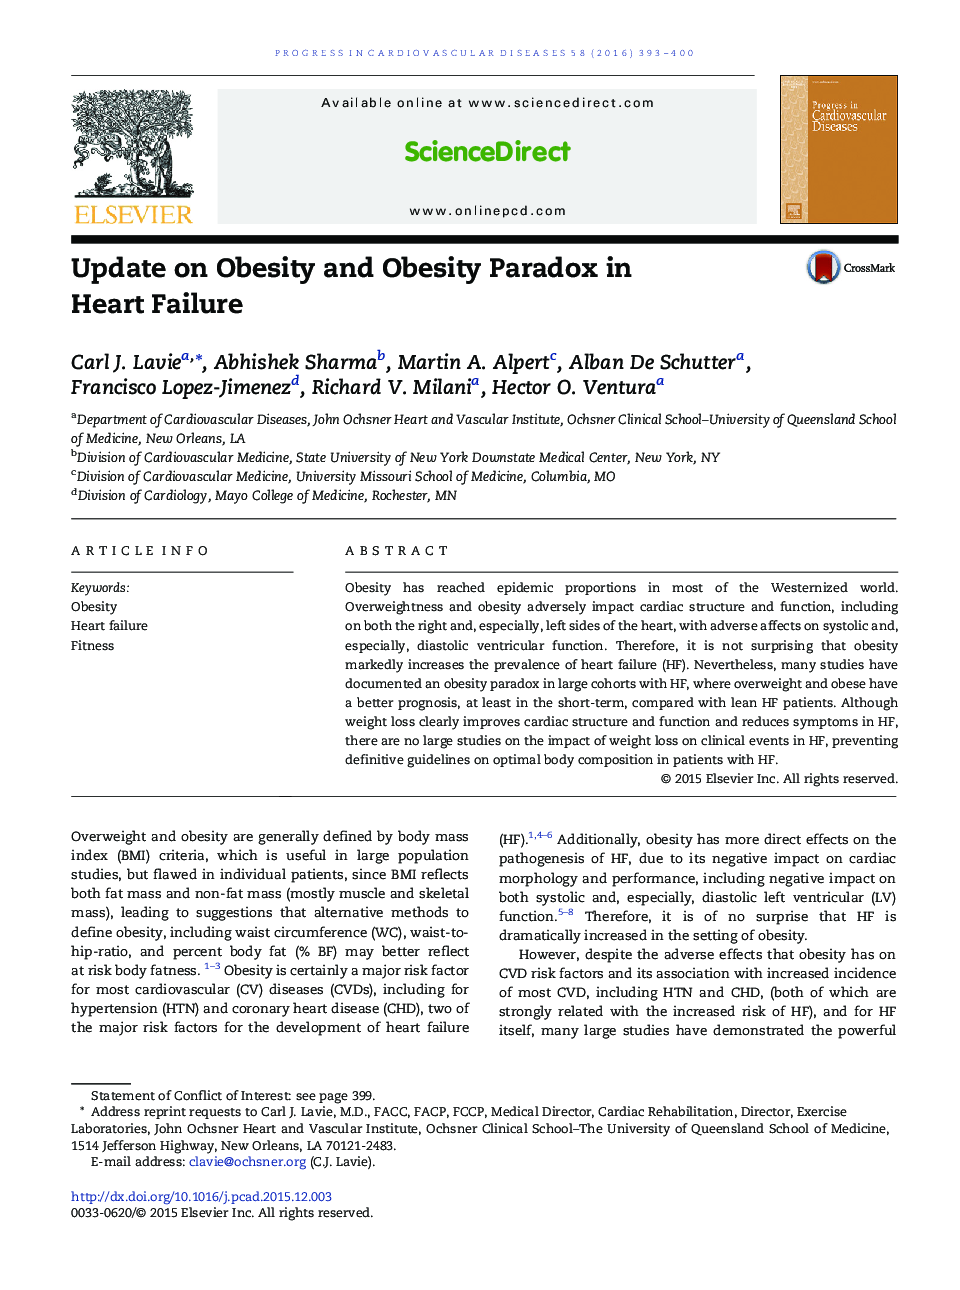 Update on Obesity and Obesity Paradox in Heart Failure 